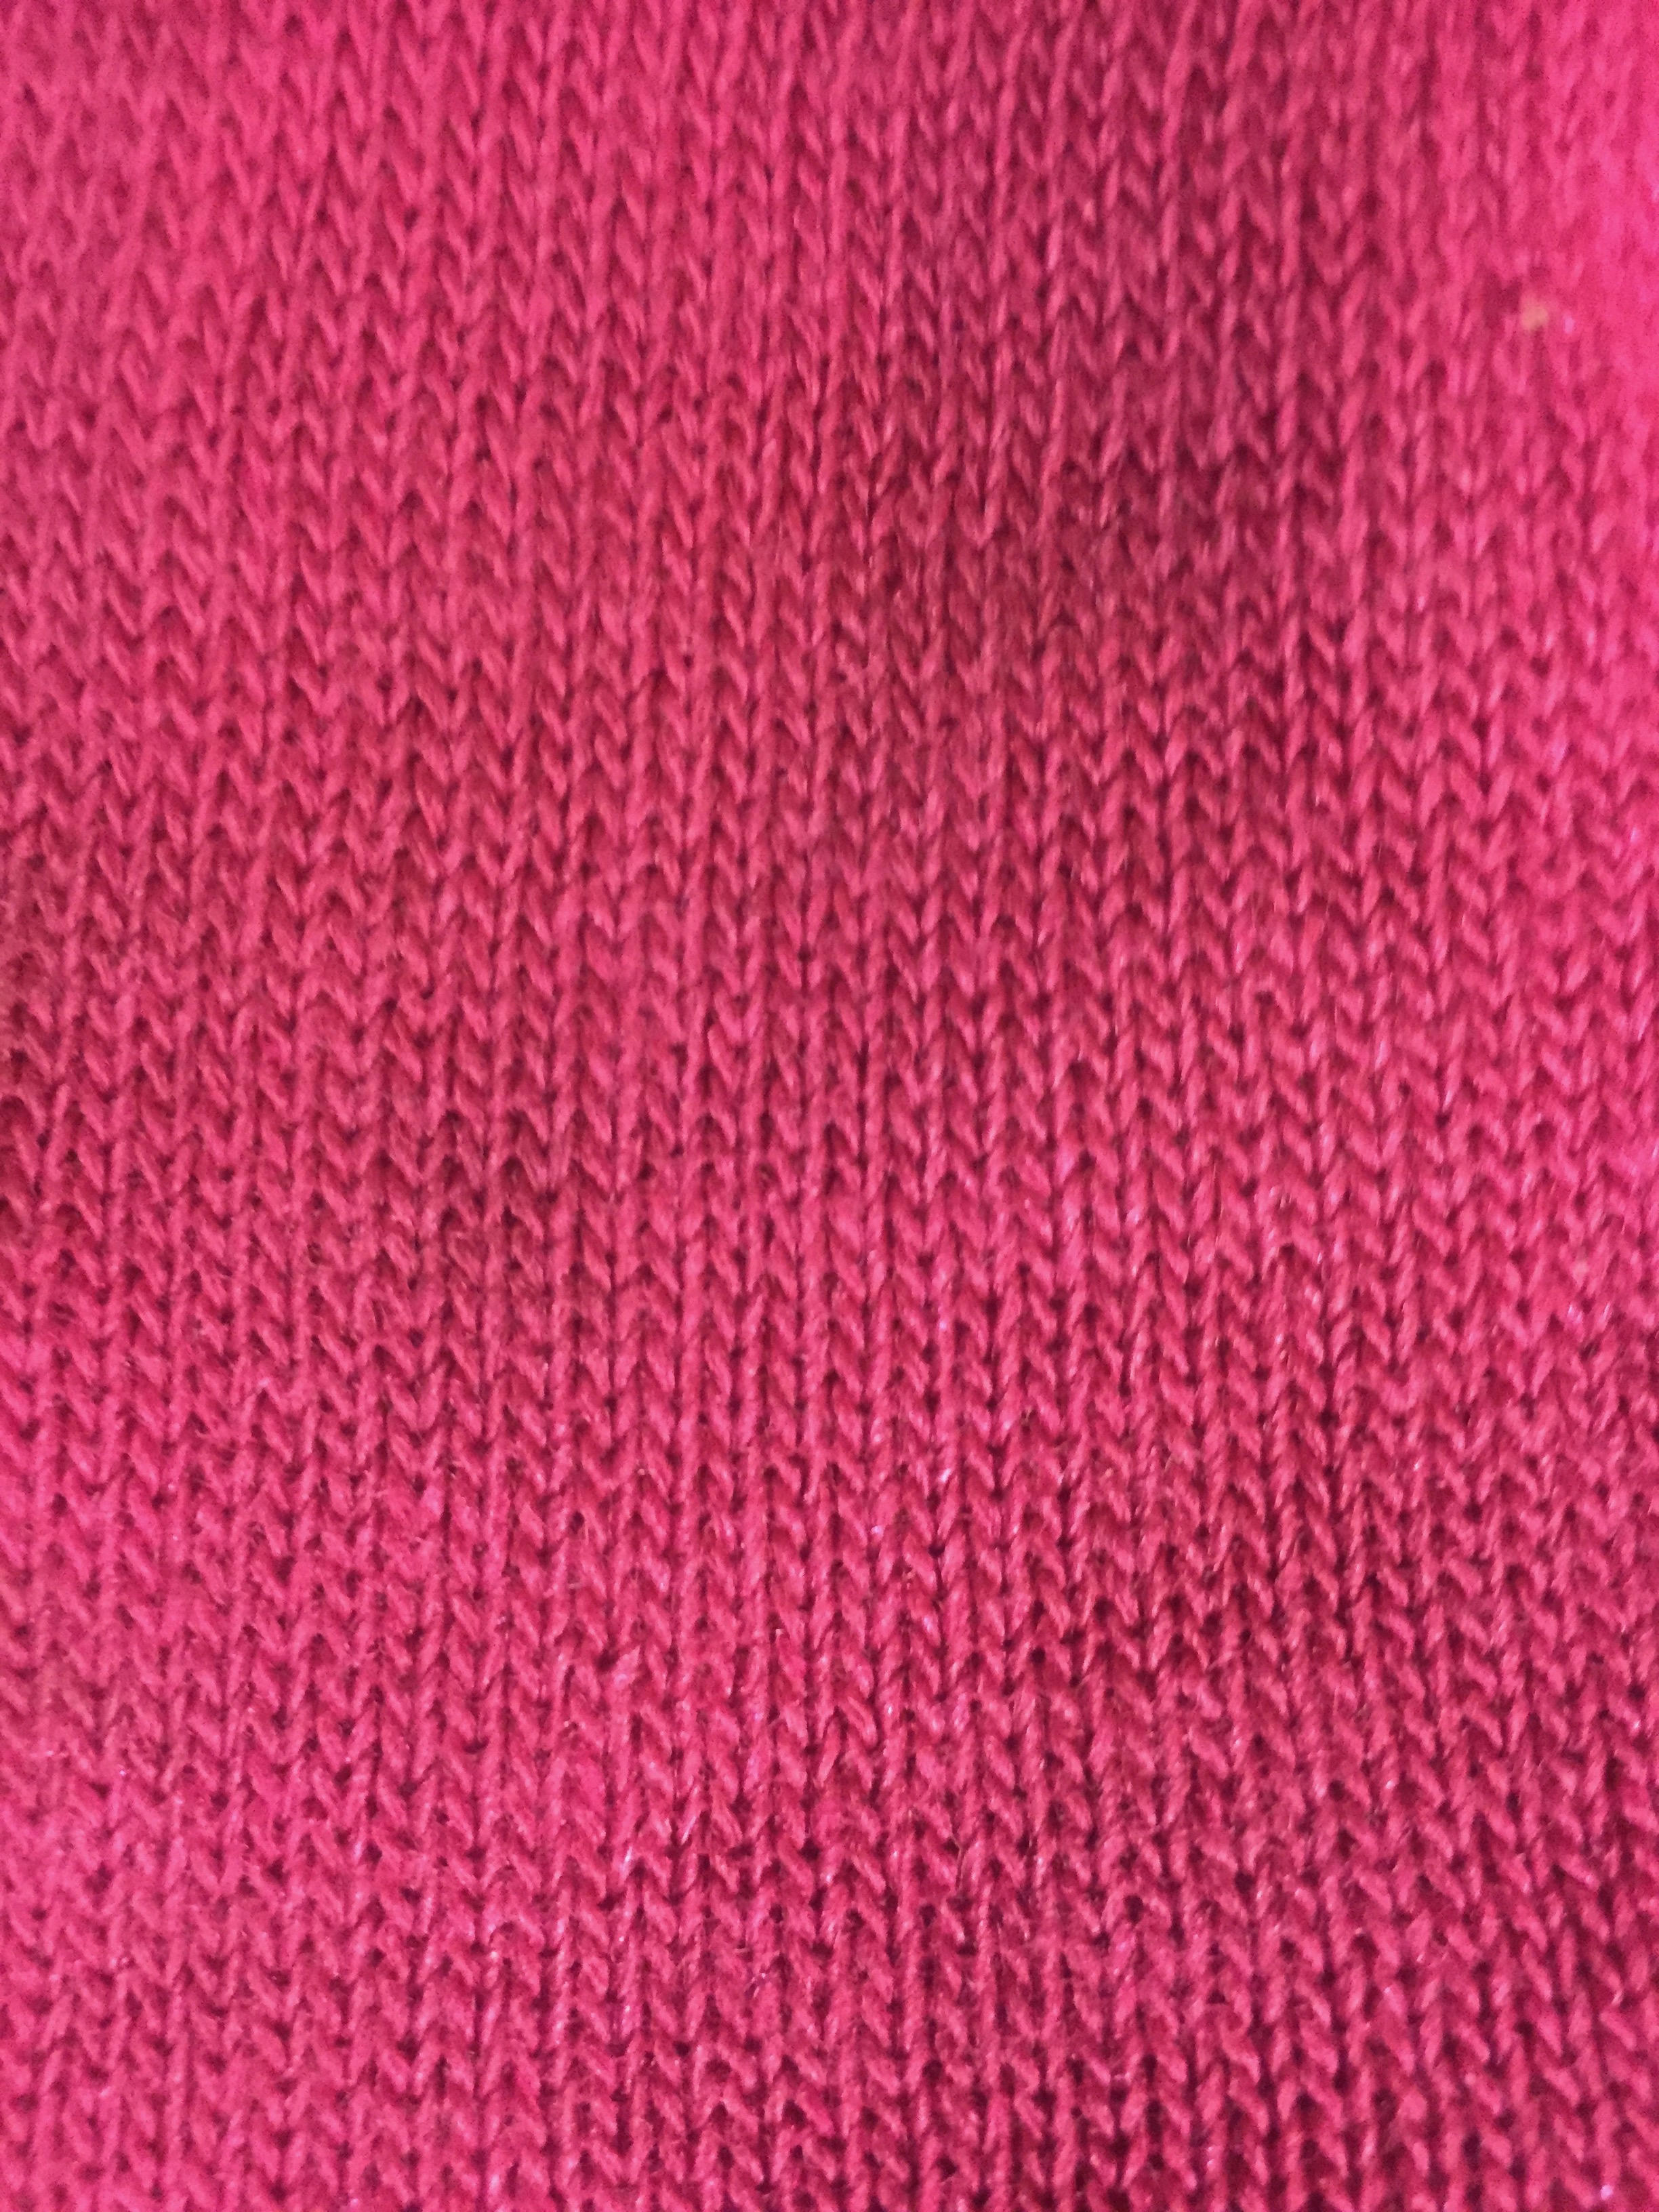 Loose pink knitted cotton fabric texture